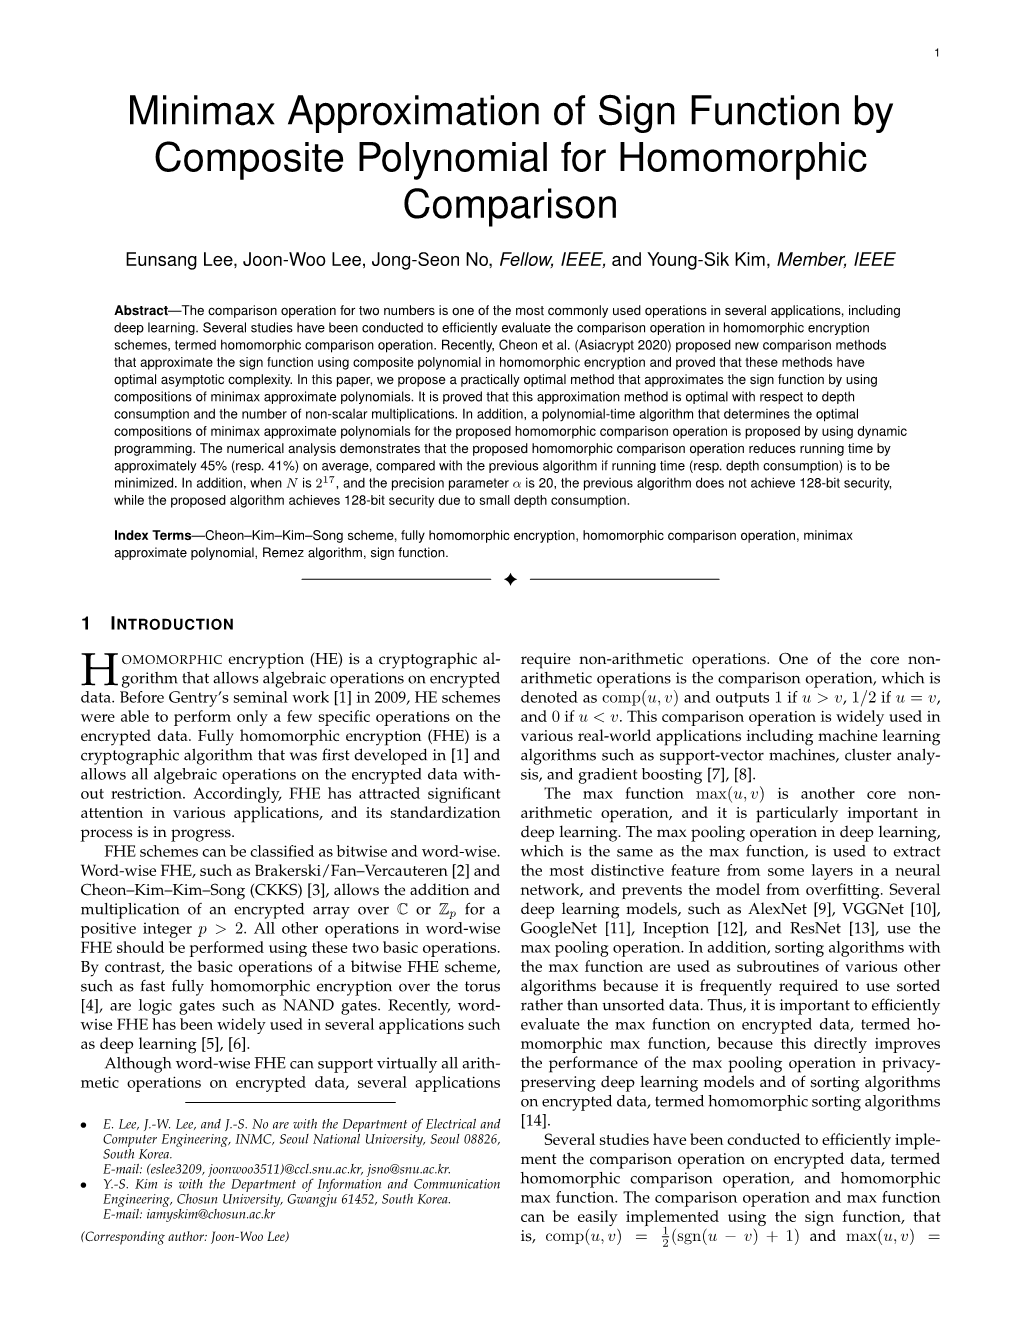 Minimax Approximation of Sign Function by Composite Polynomial for Homomorphic Comparison